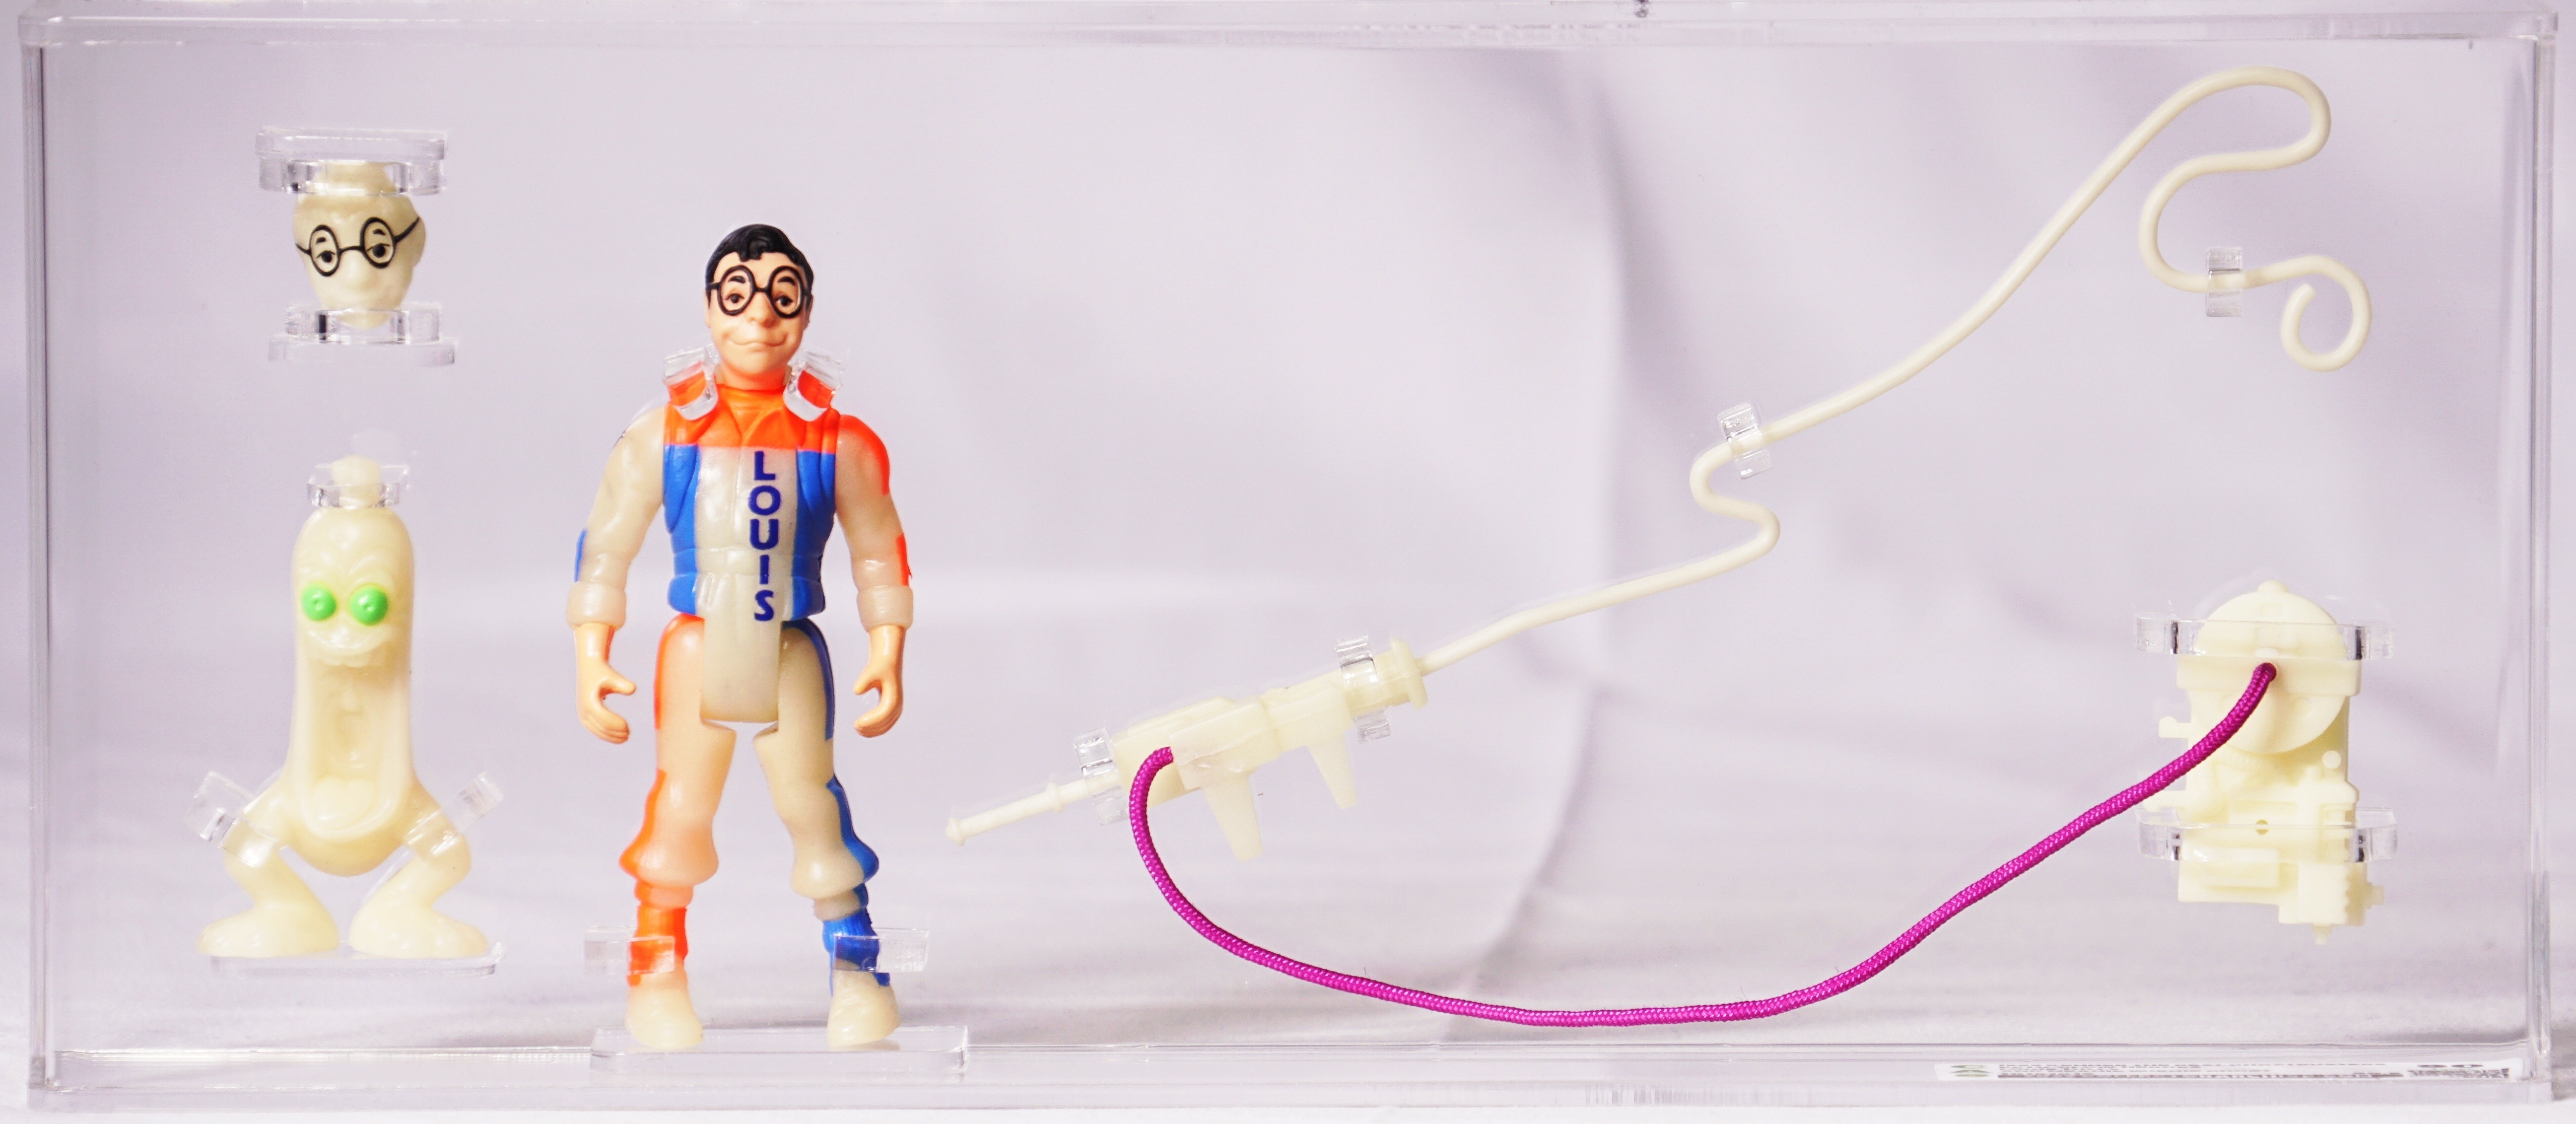 real ghostbusters louis